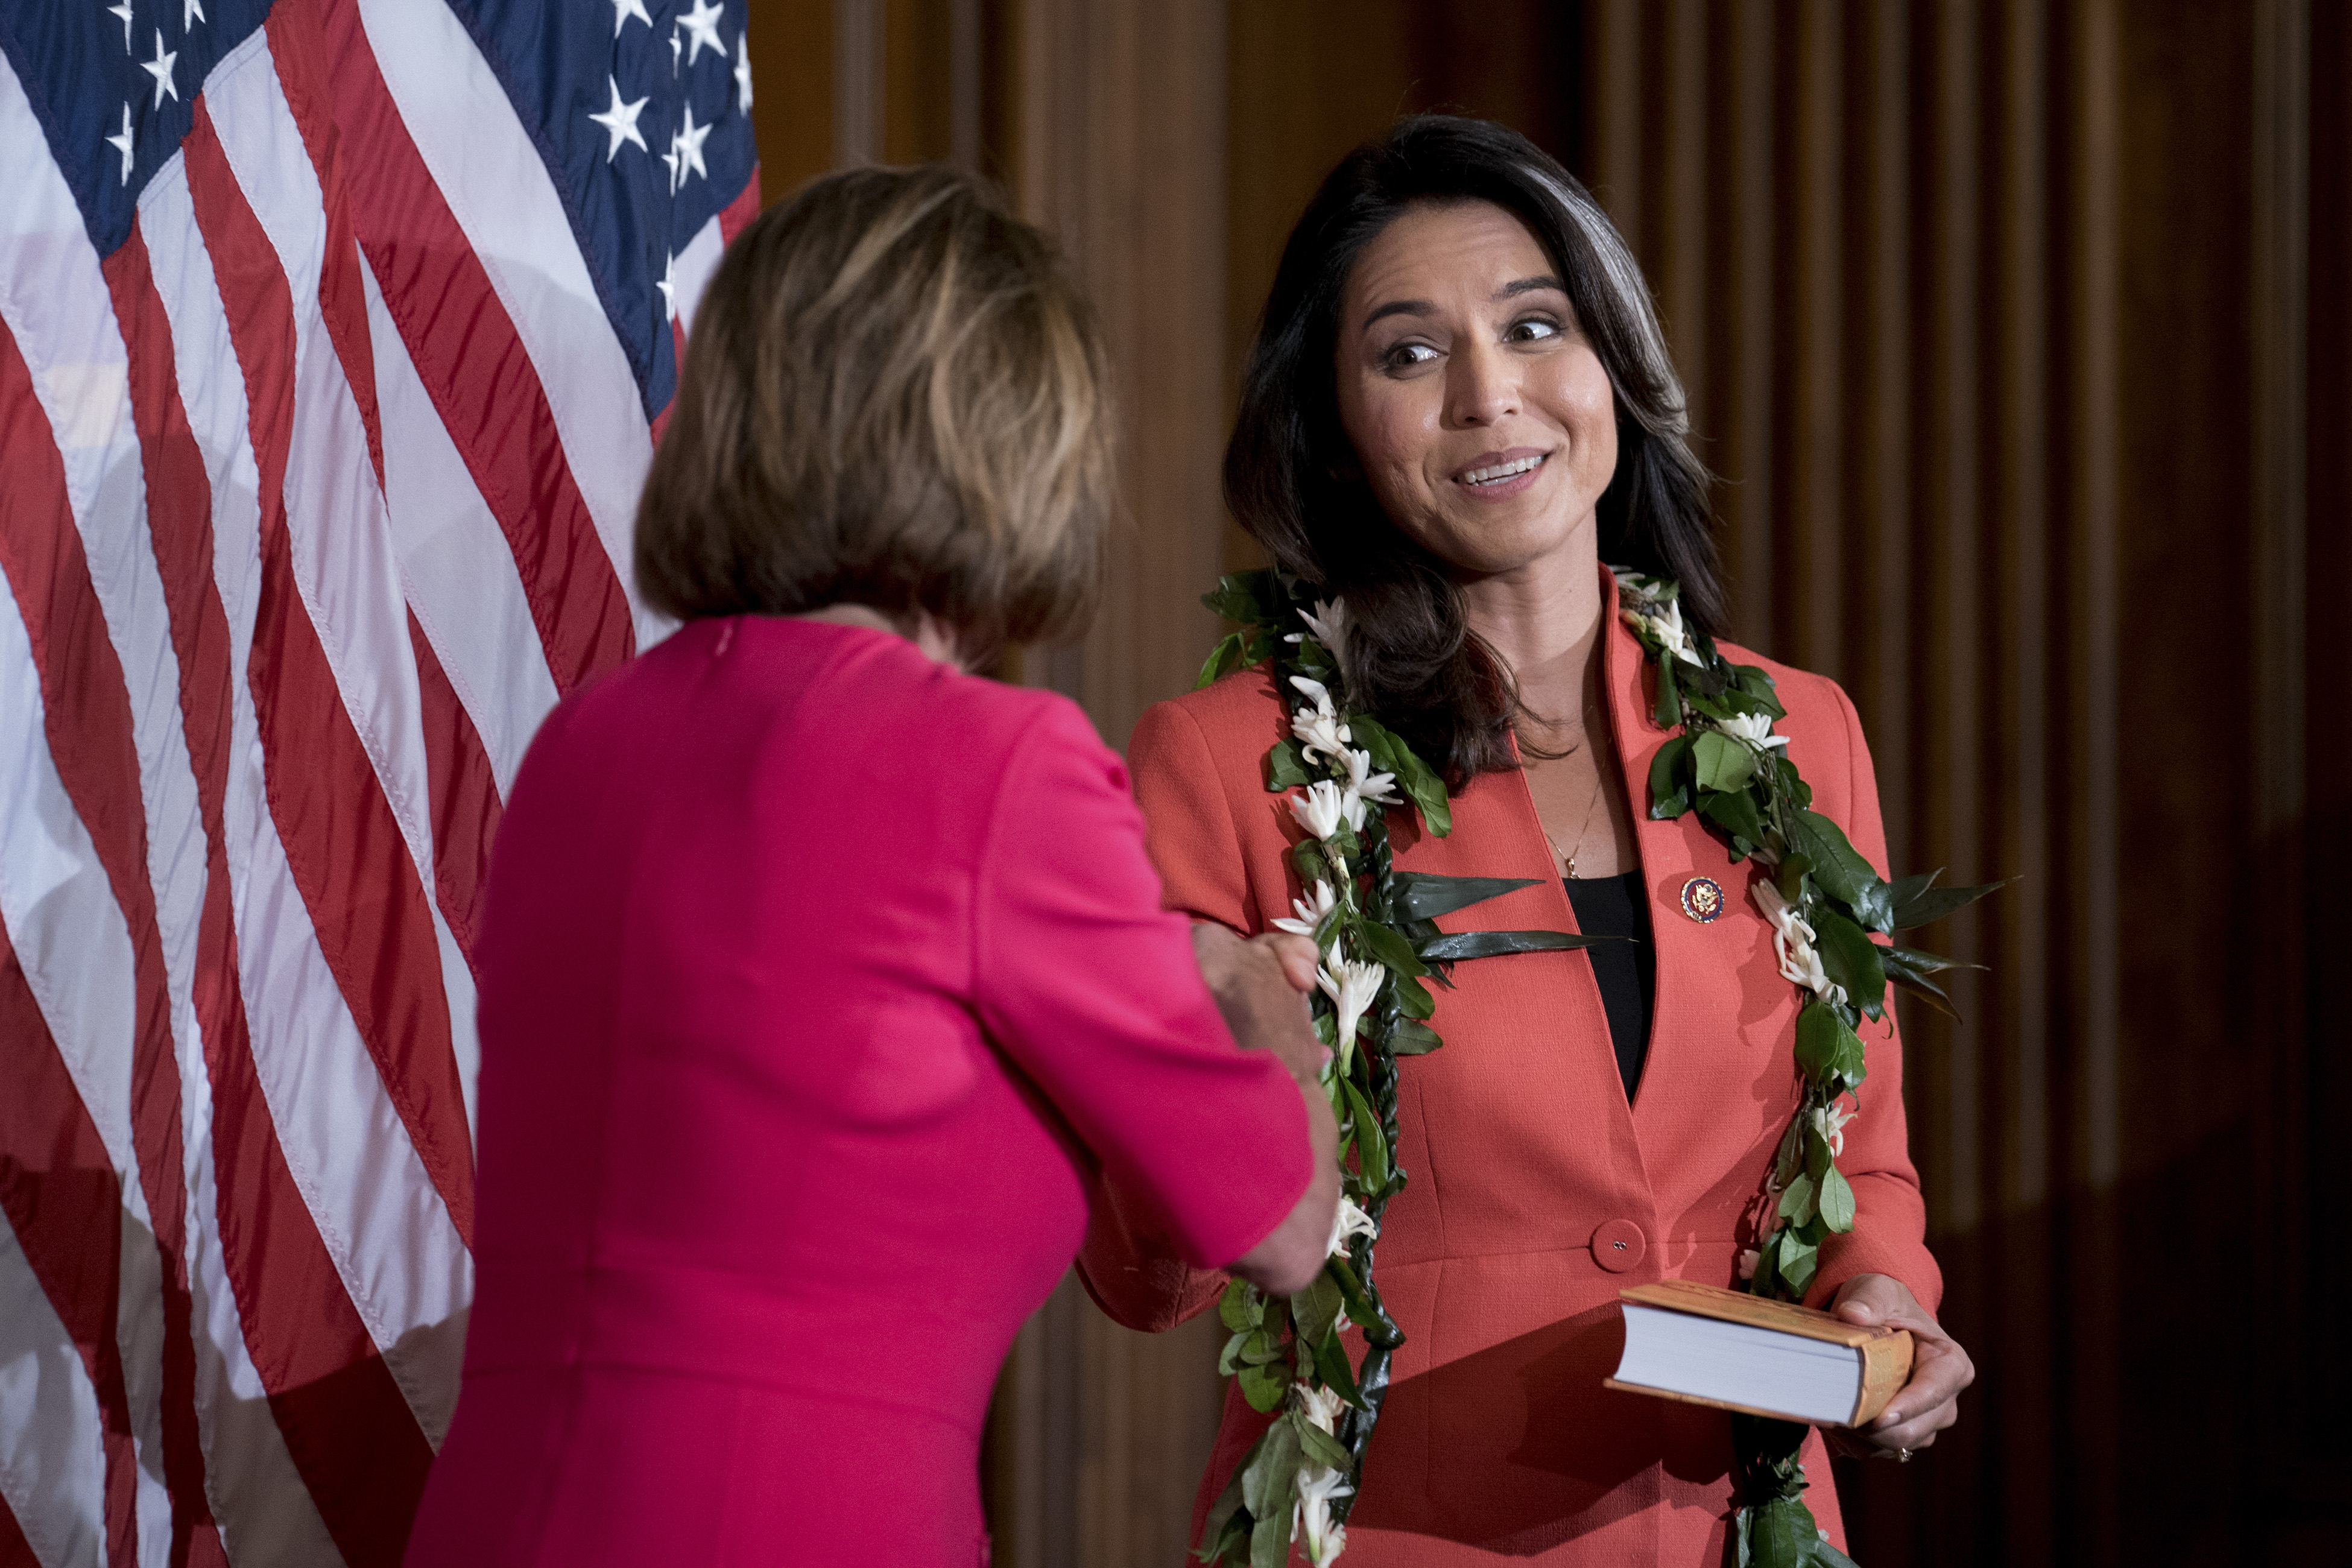 Tulsi Gabbard (right) is sworn in to the 116th Congress with House Speaker Nancy Pelosi on Capitol Hill in Washington on January 3, 2019.